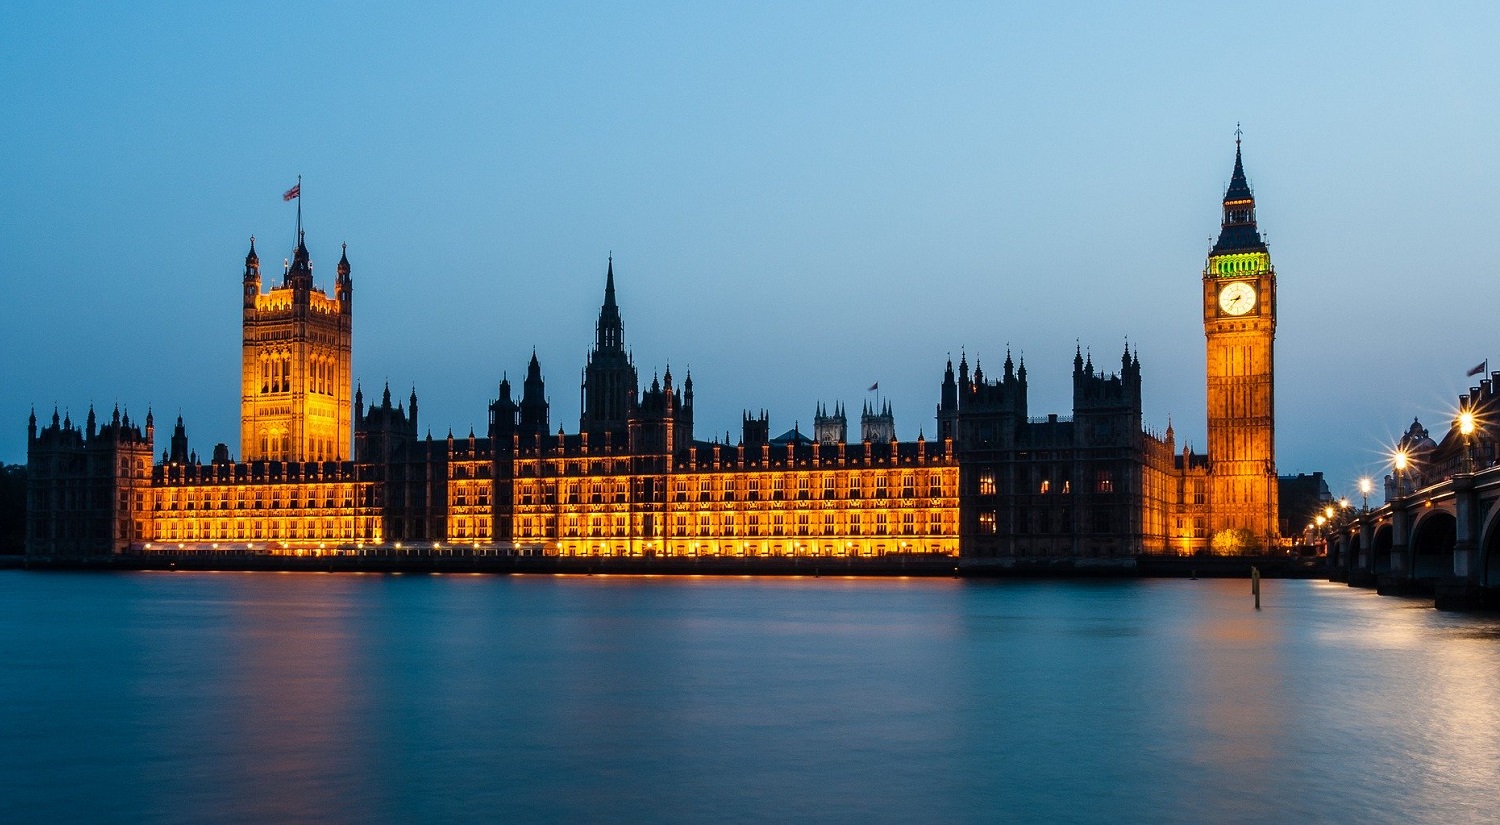 A night time scene of the Houses of Parliament in London.